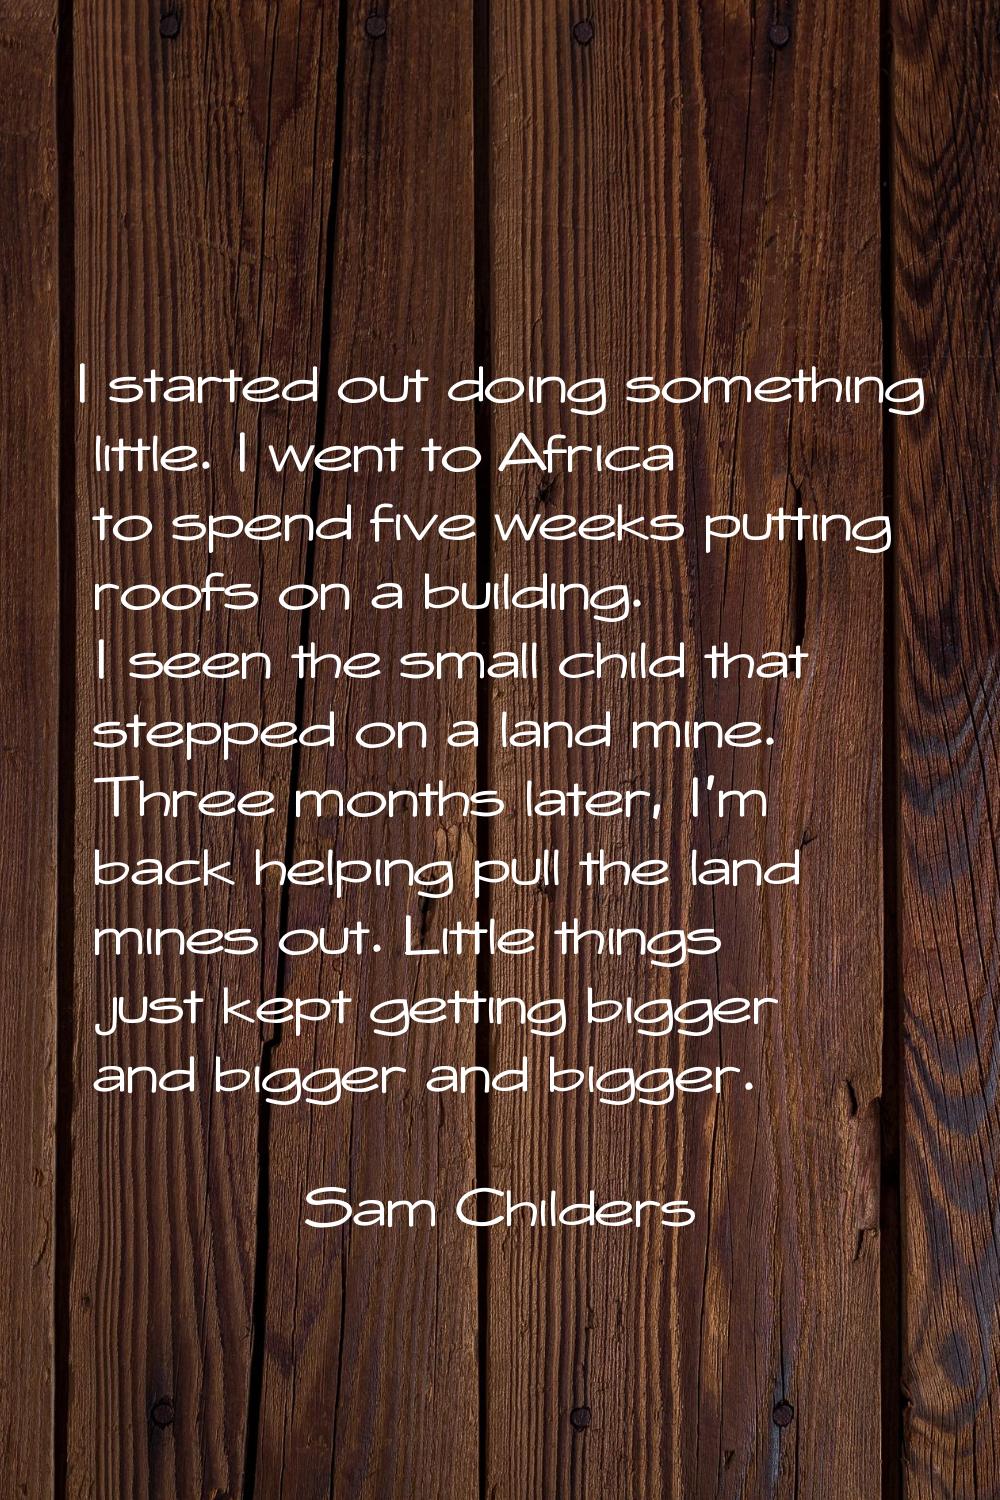 I started out doing something little. I went to Africa to spend five weeks putting roofs on a build